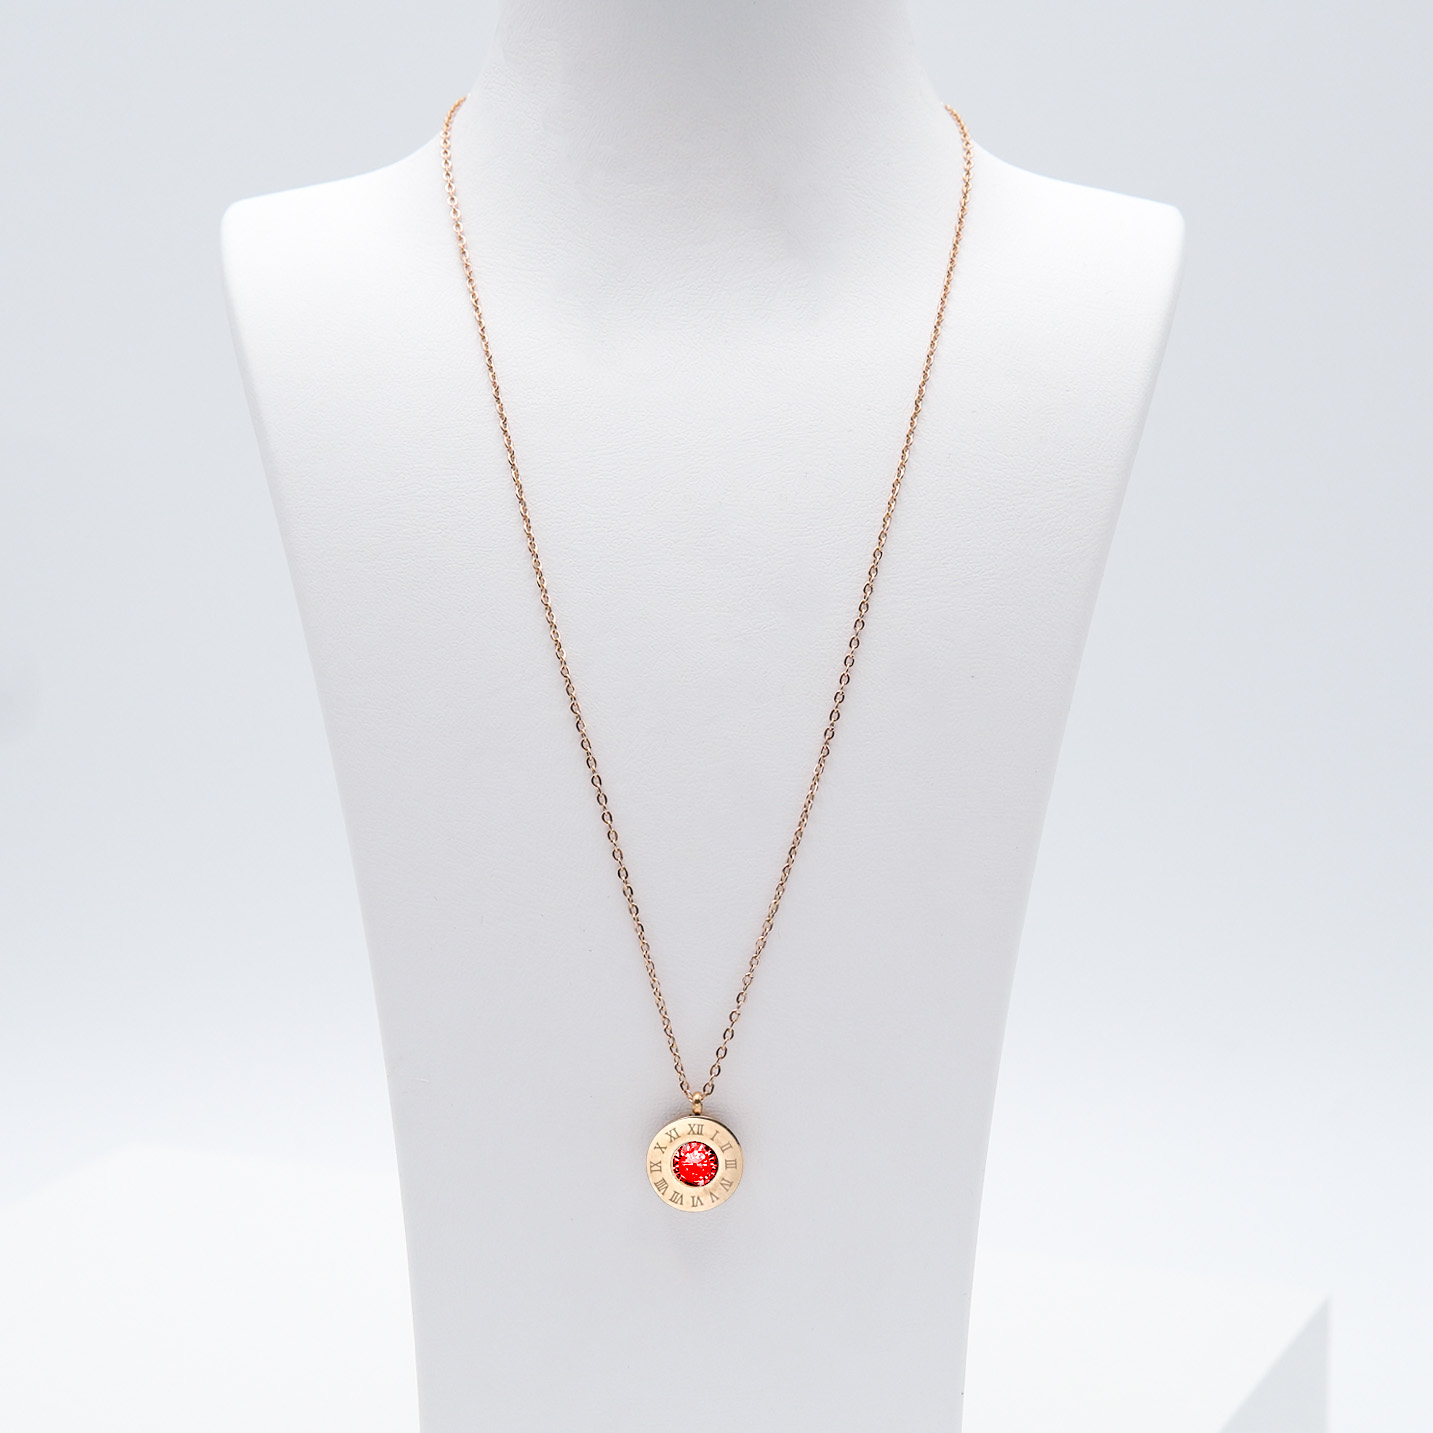 2- 4 Queen Diamonds Necklace Rose Edition Halsband Modern and trendy Necklace and women jewelry and accessories from SWEVALI fashion Sweden